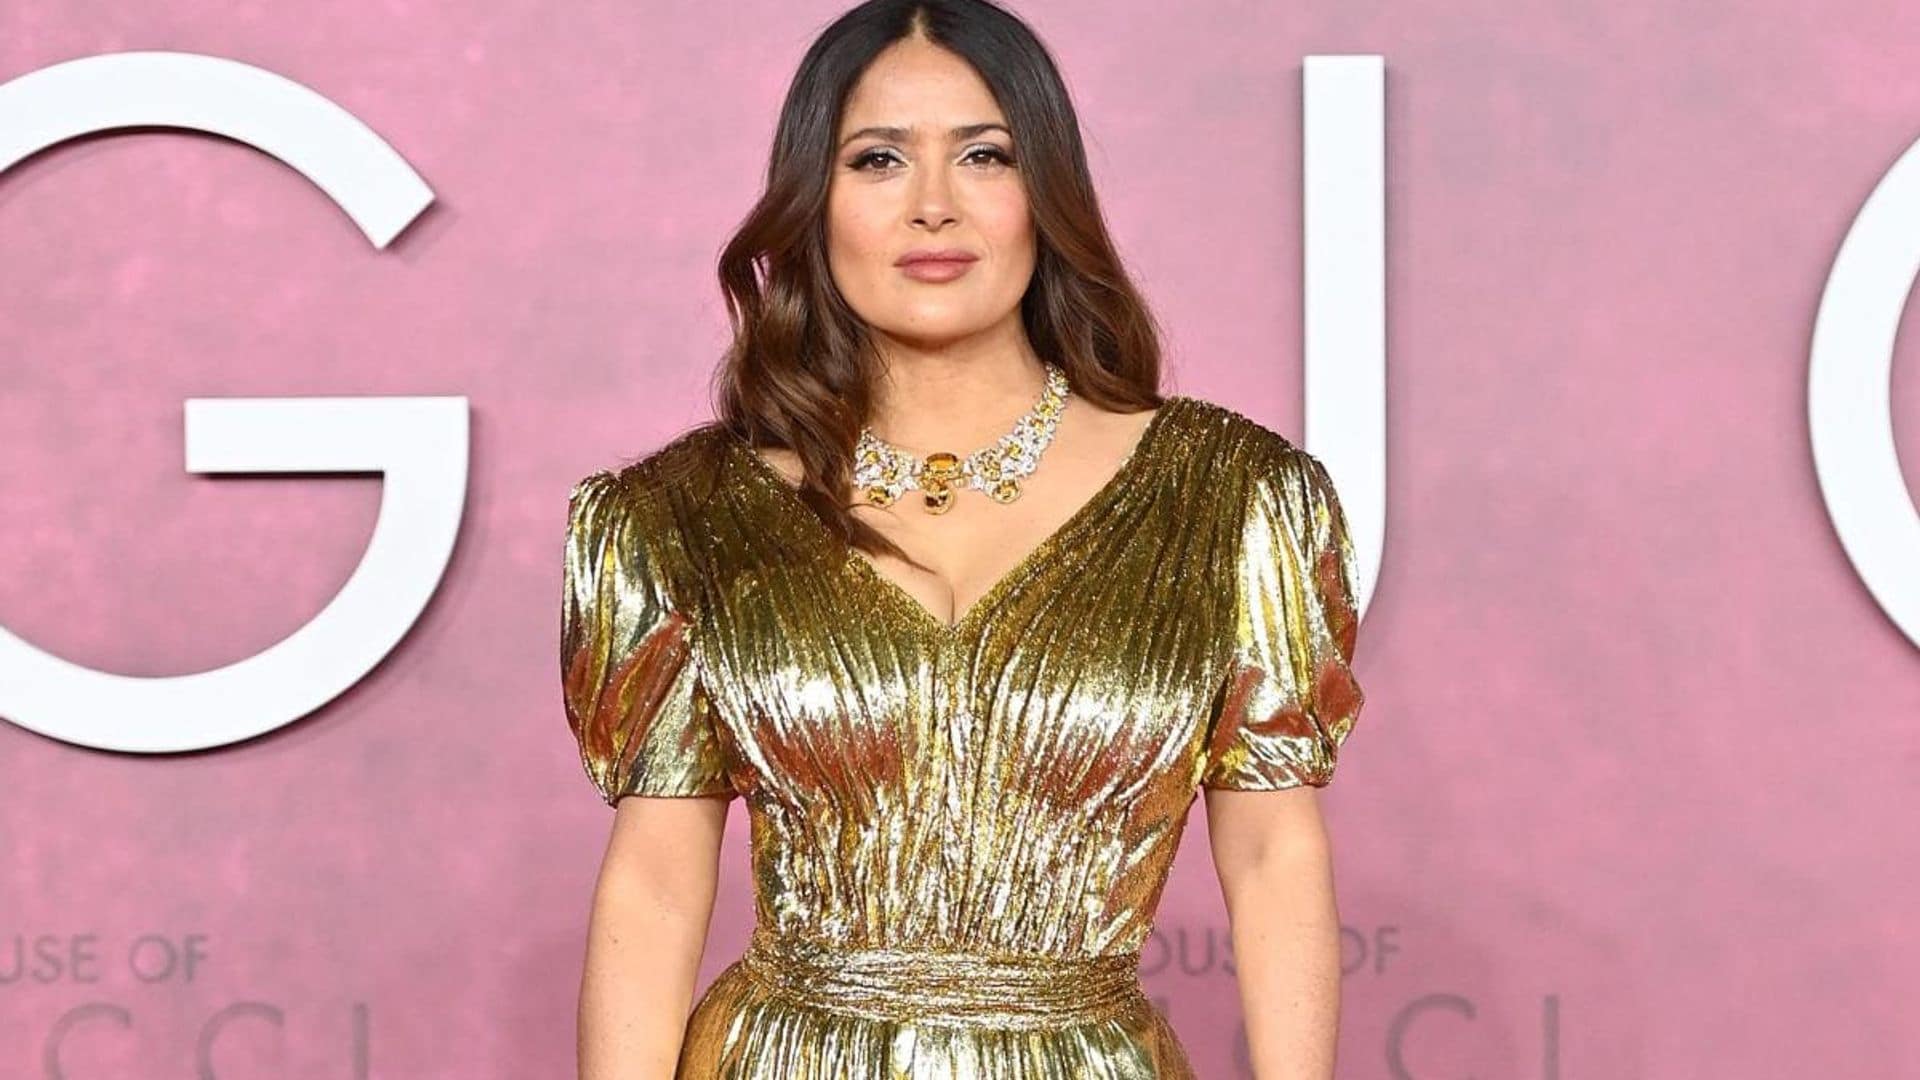 Happy birthday, Salma Hayek! Let’s have a look at some of her biggest achievements